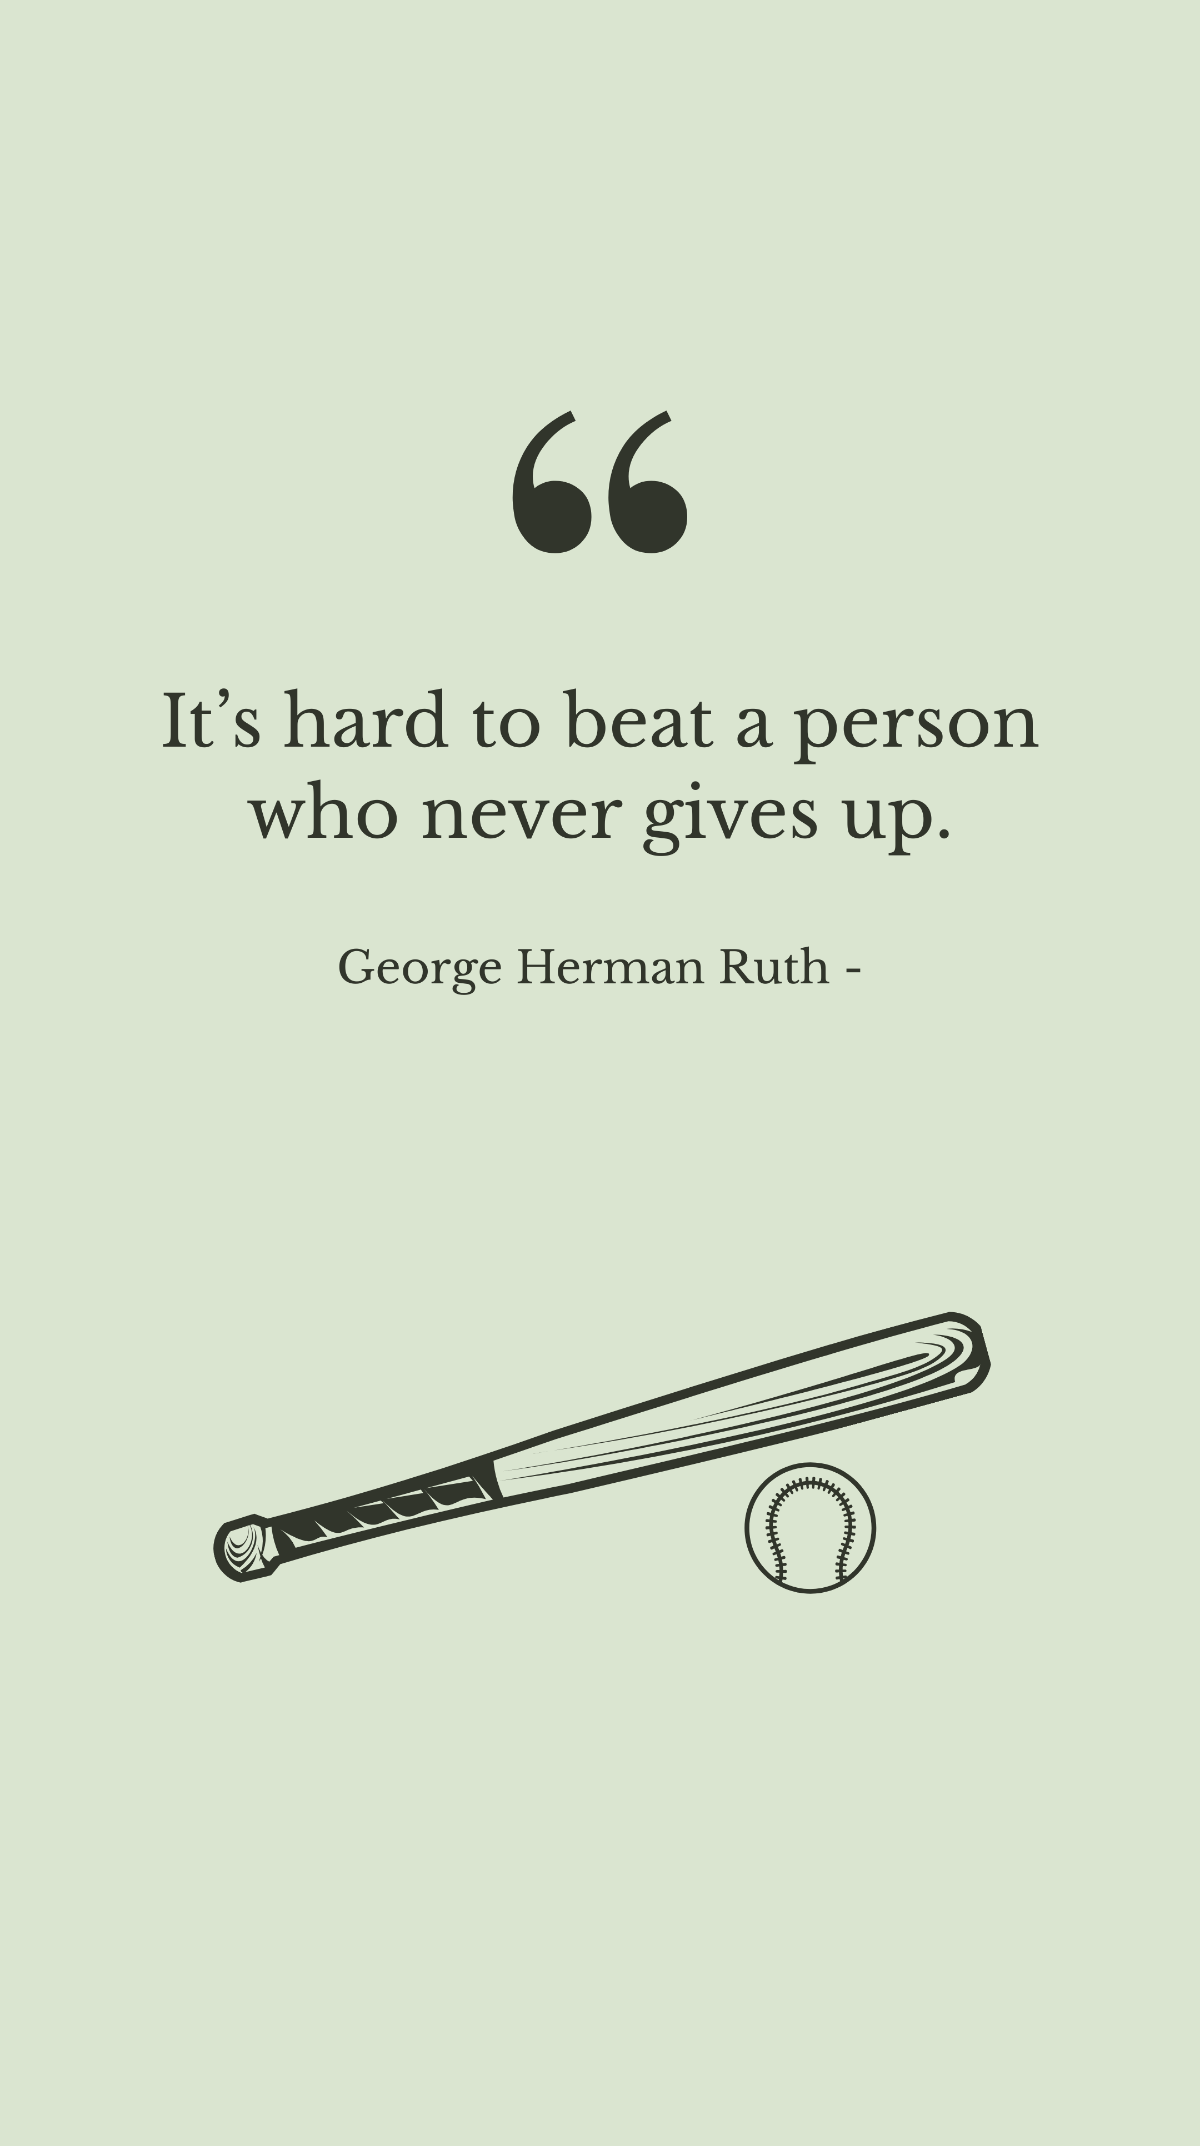 George Herman Ruth - It’s hard to beat a person who never gives up. Template